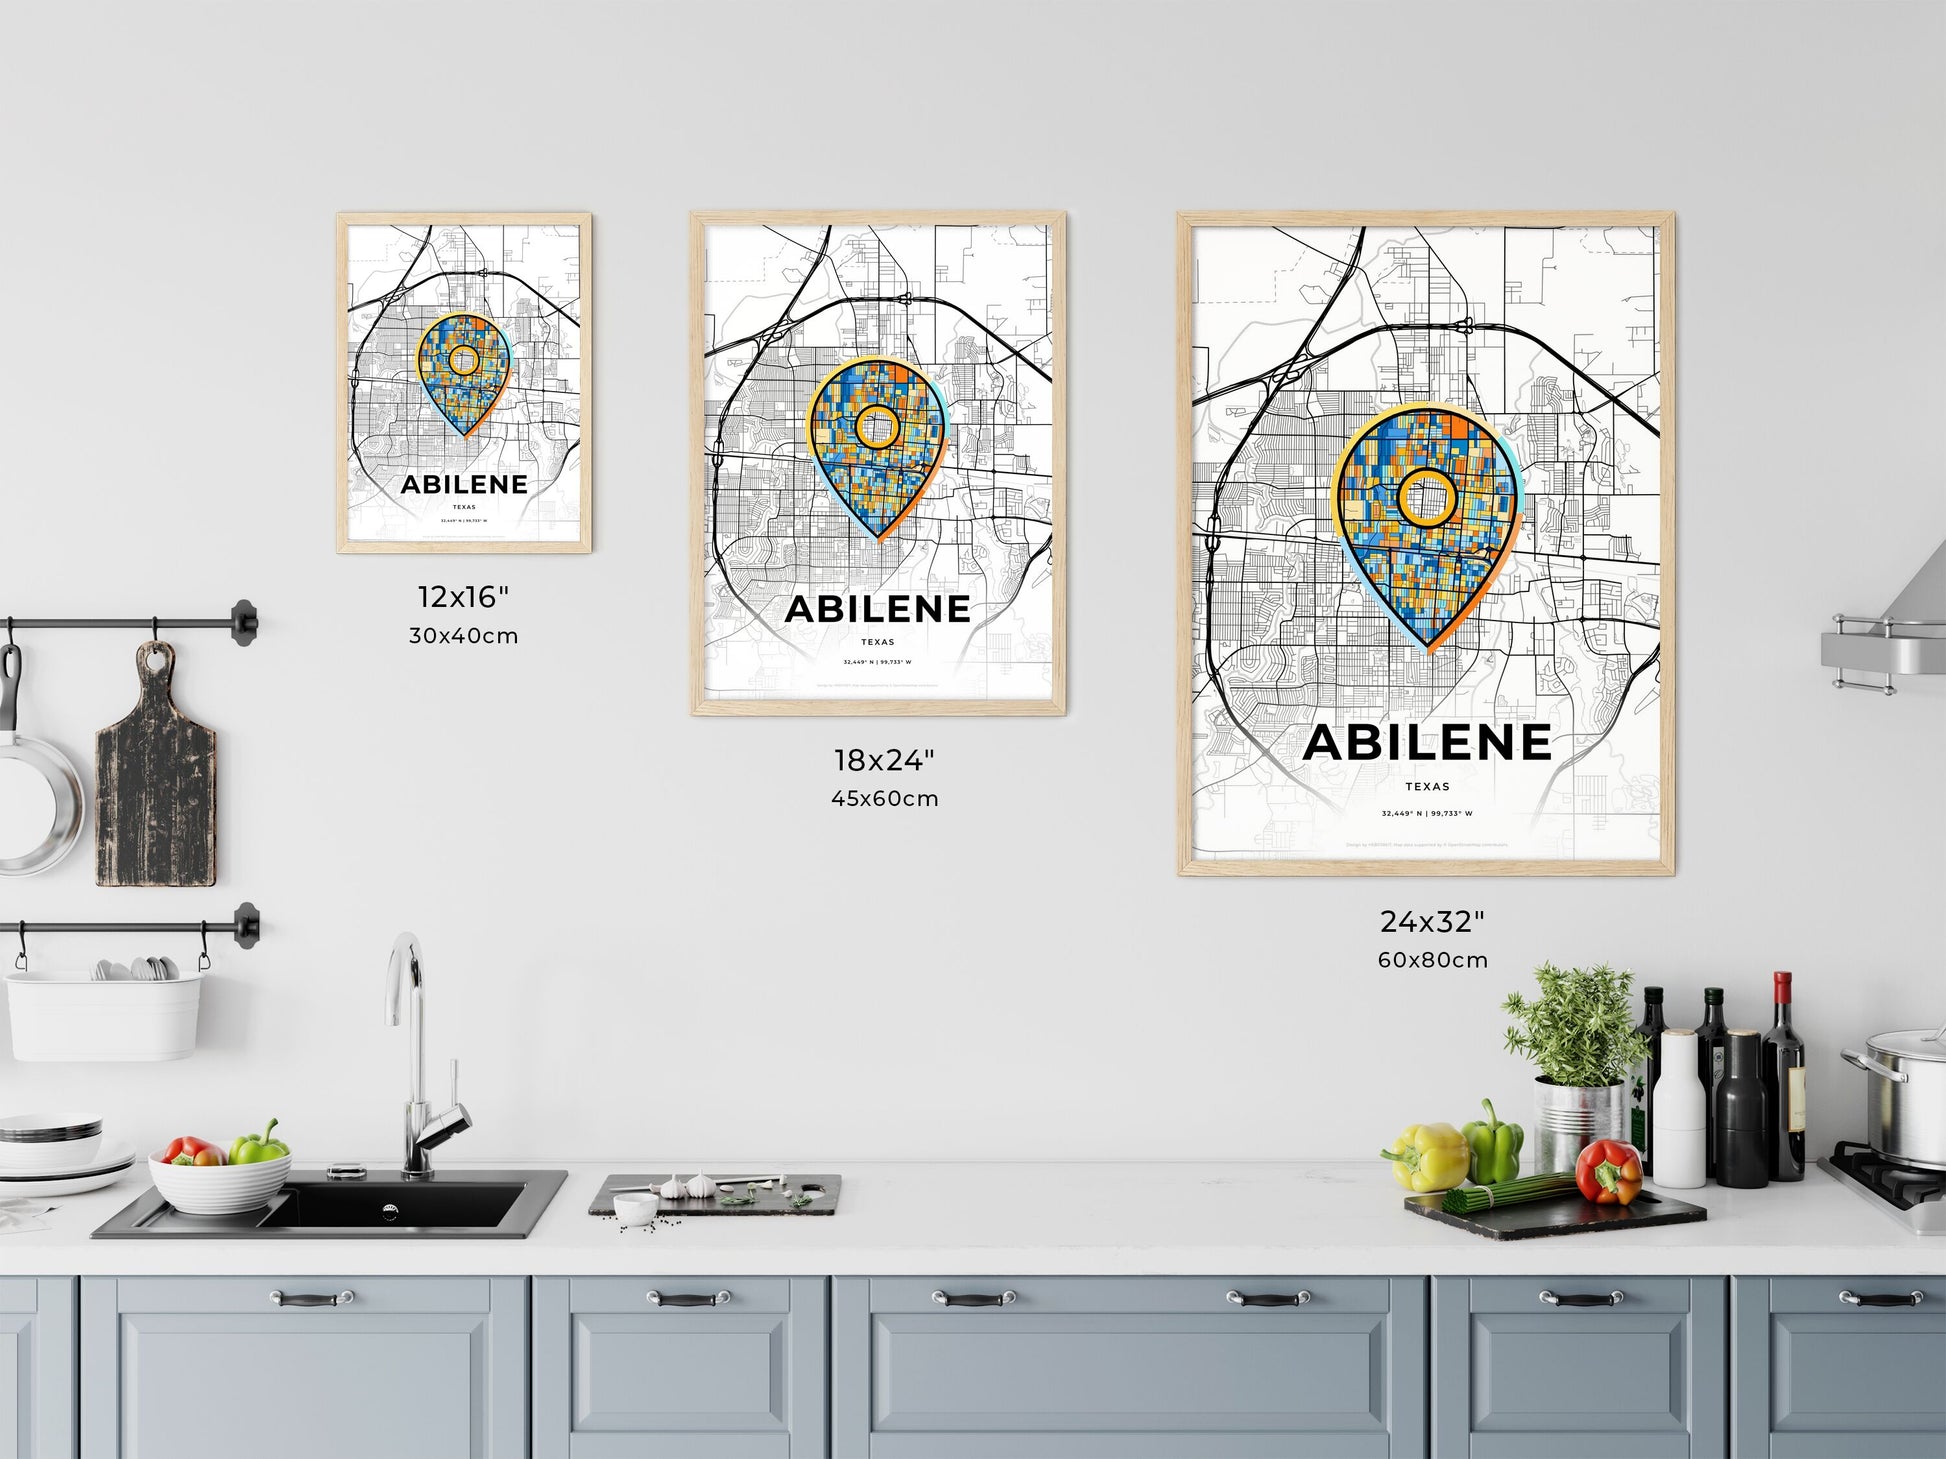 ABILENE TEXAS minimal art map with a colorful icon. Where it all began, Couple map gift.